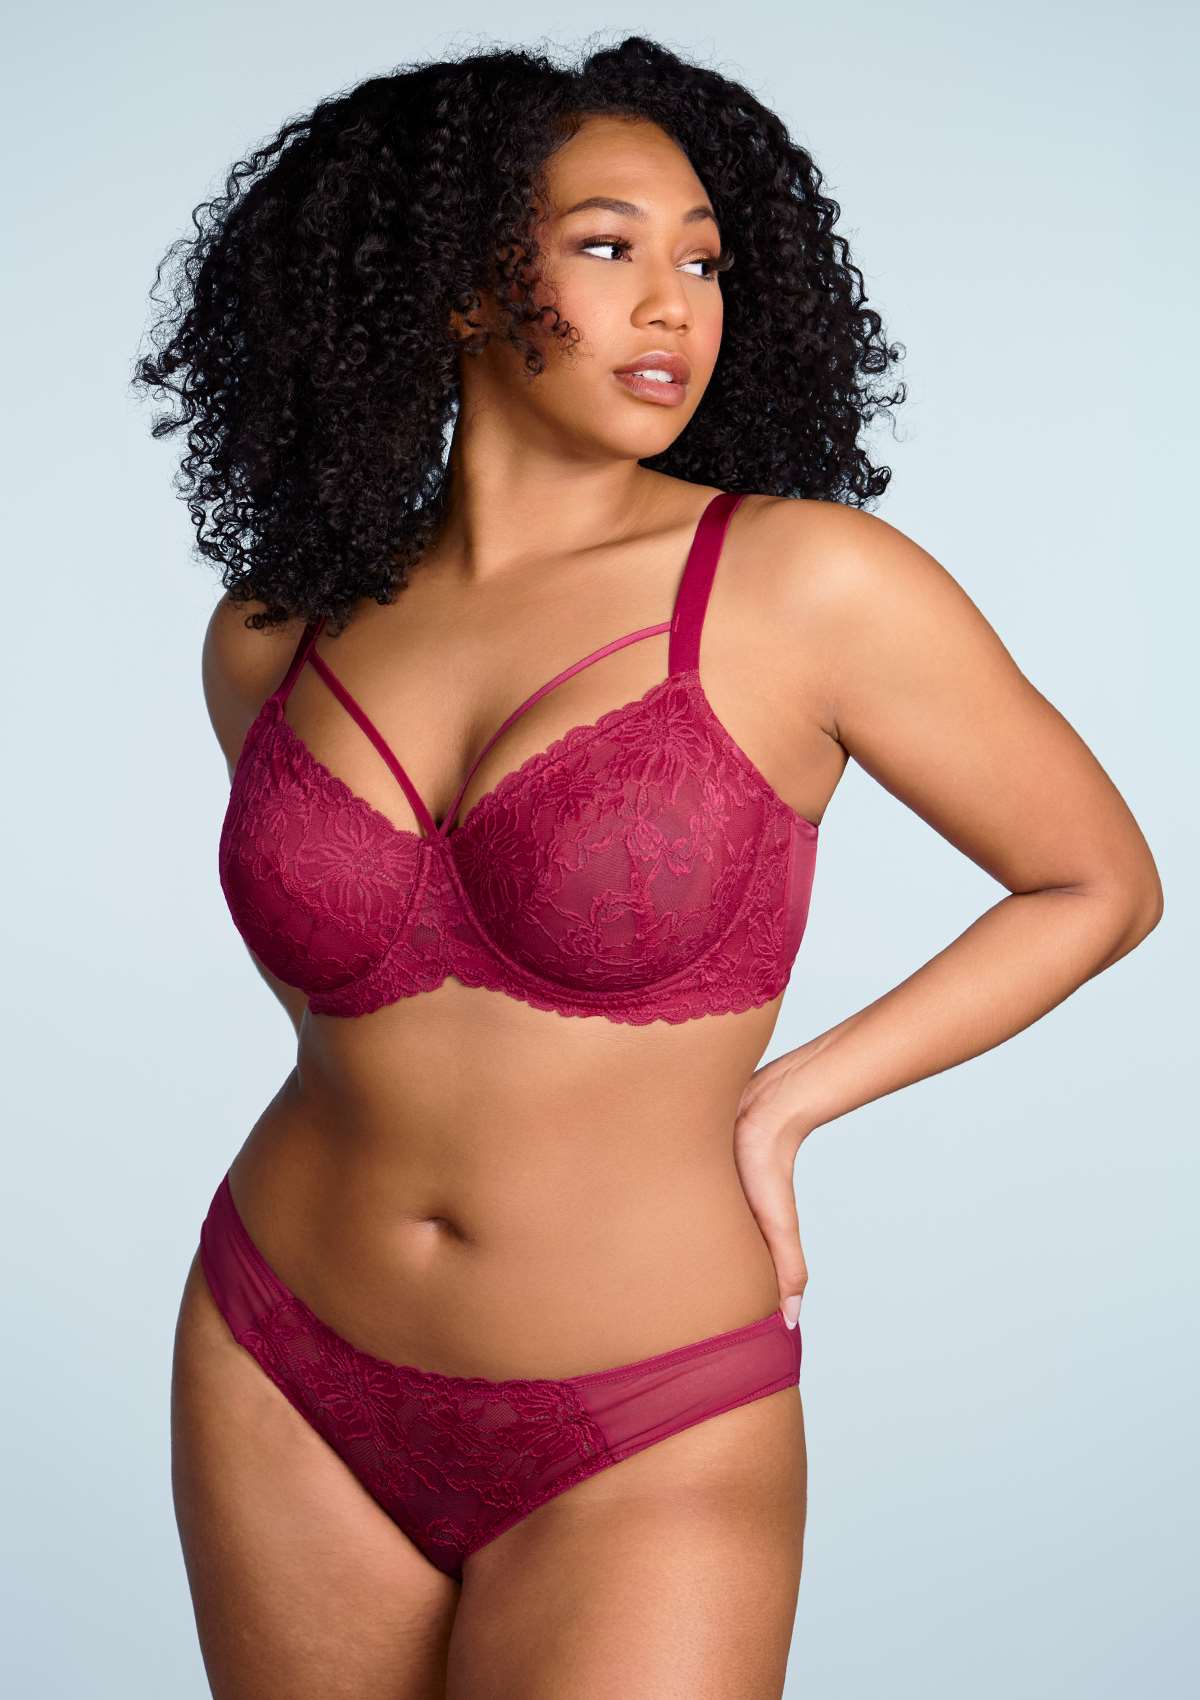 HSIA Pretty In Petals Lace Panties And Bra Set: Plus Size Women Bra - Red / 34 / D